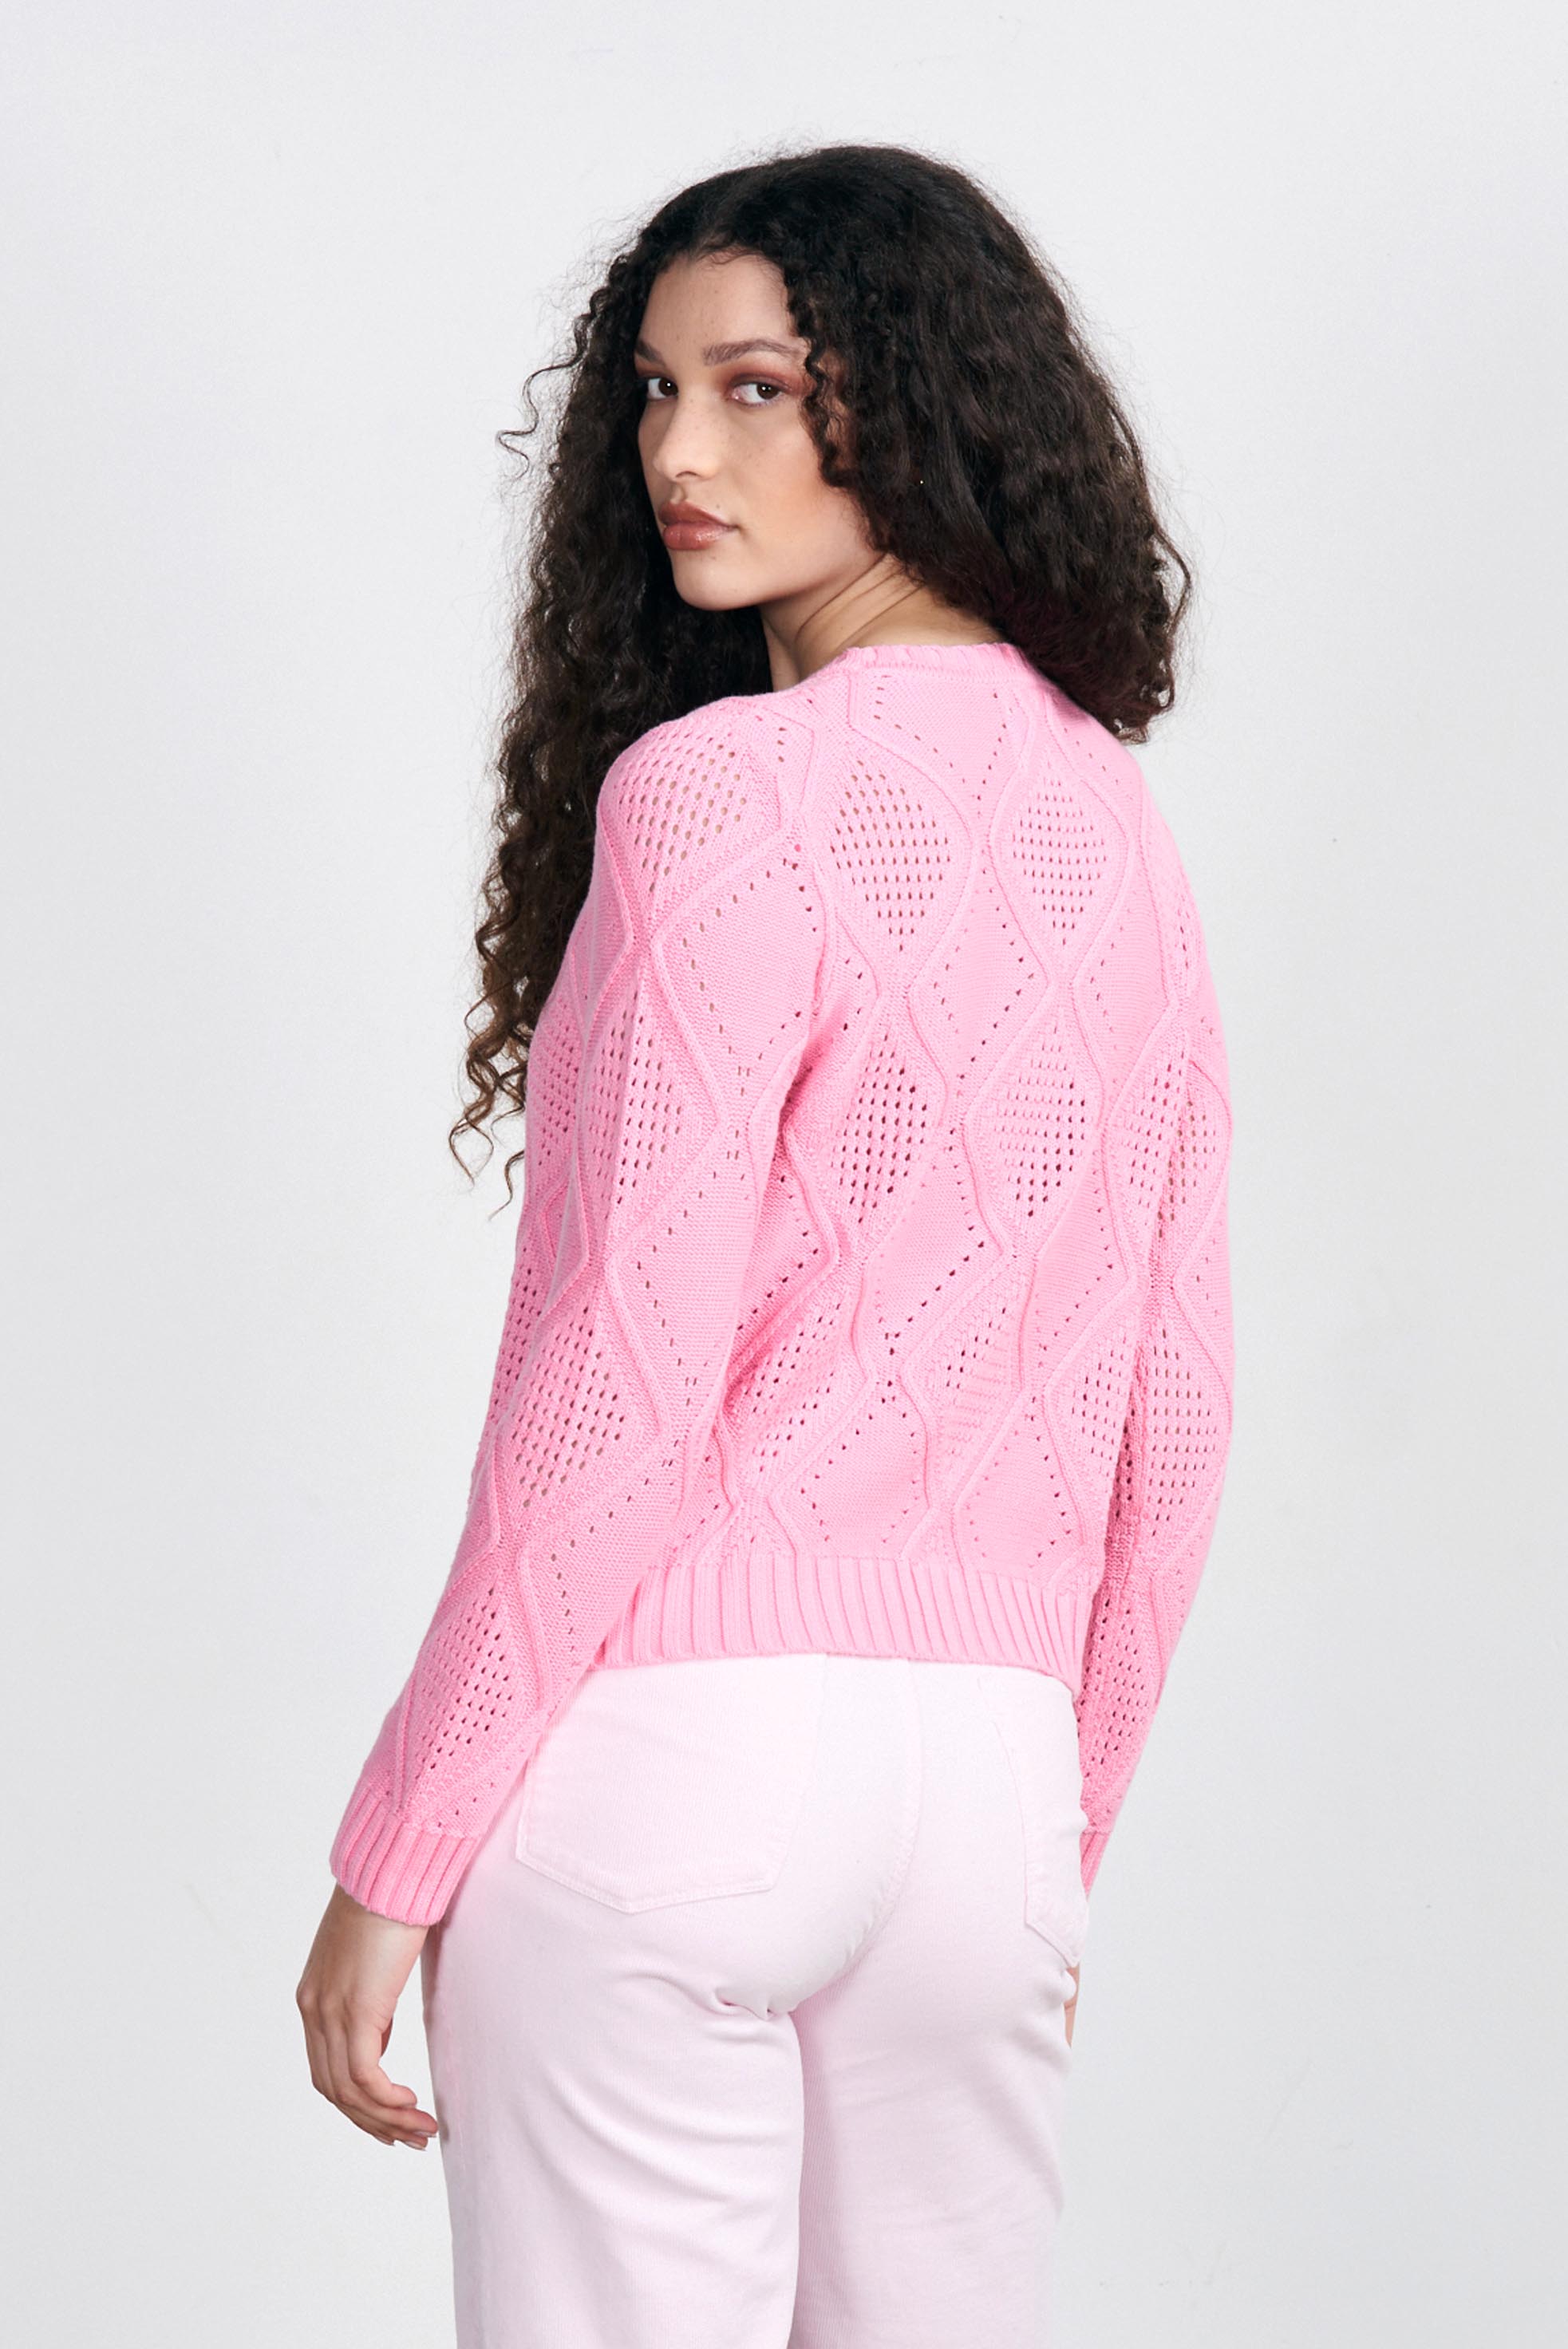 Brown haired female model wearing Jumper1234 Pink cotton crew neck jumper with a diamond texture stitch pattern facing away from the camera